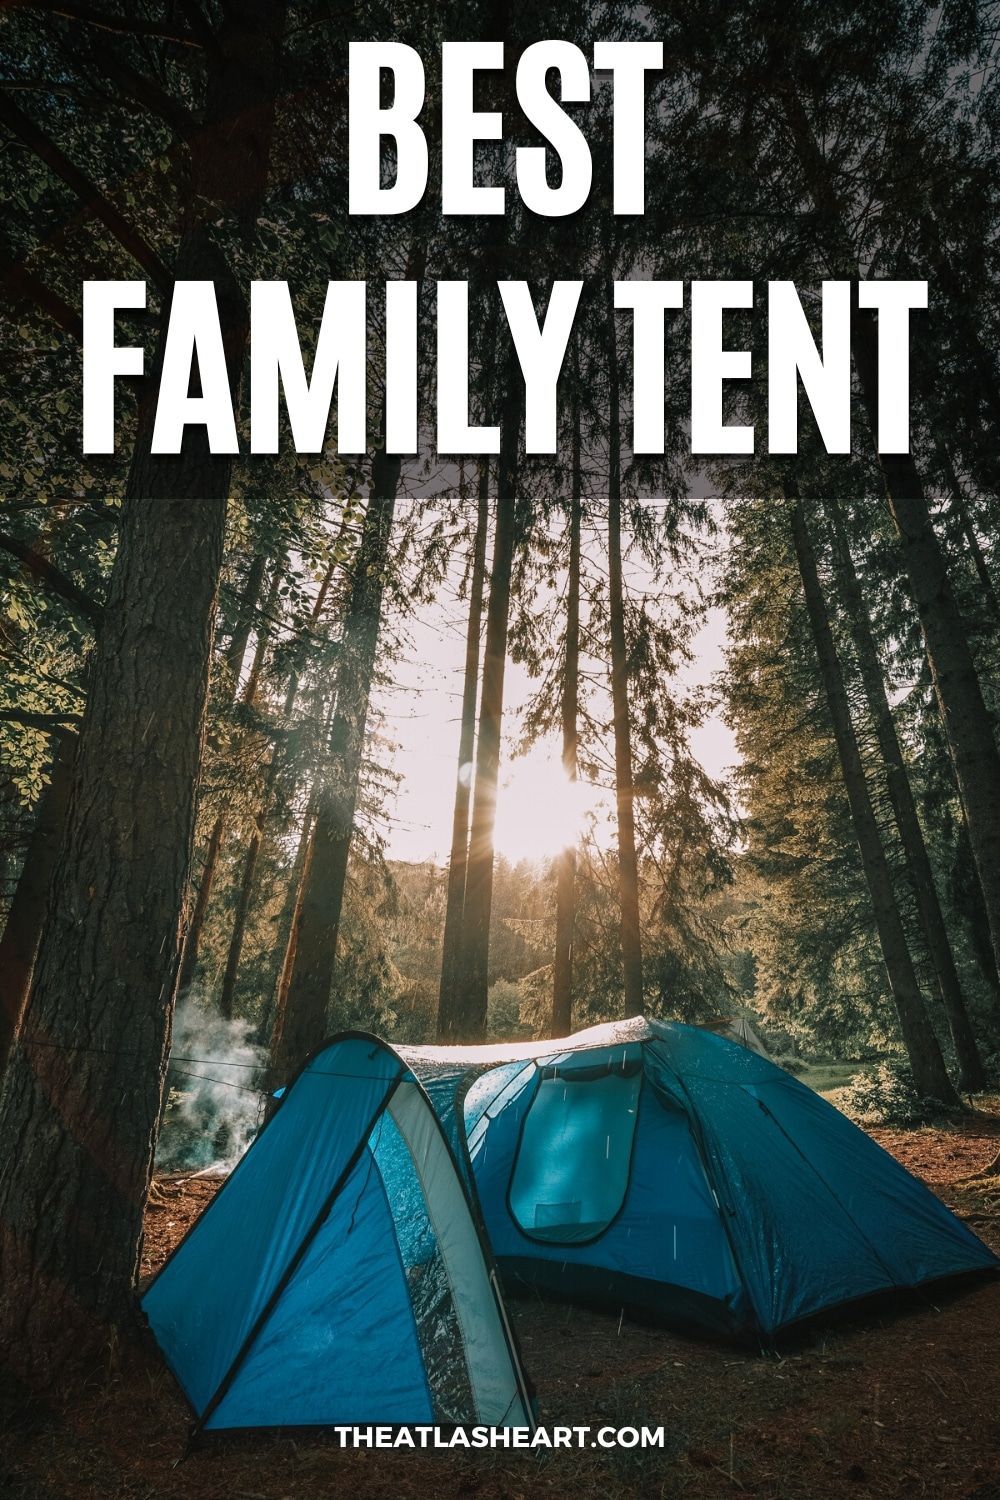 11 Best Family Tents [Top Camping Tents for Family Camping]